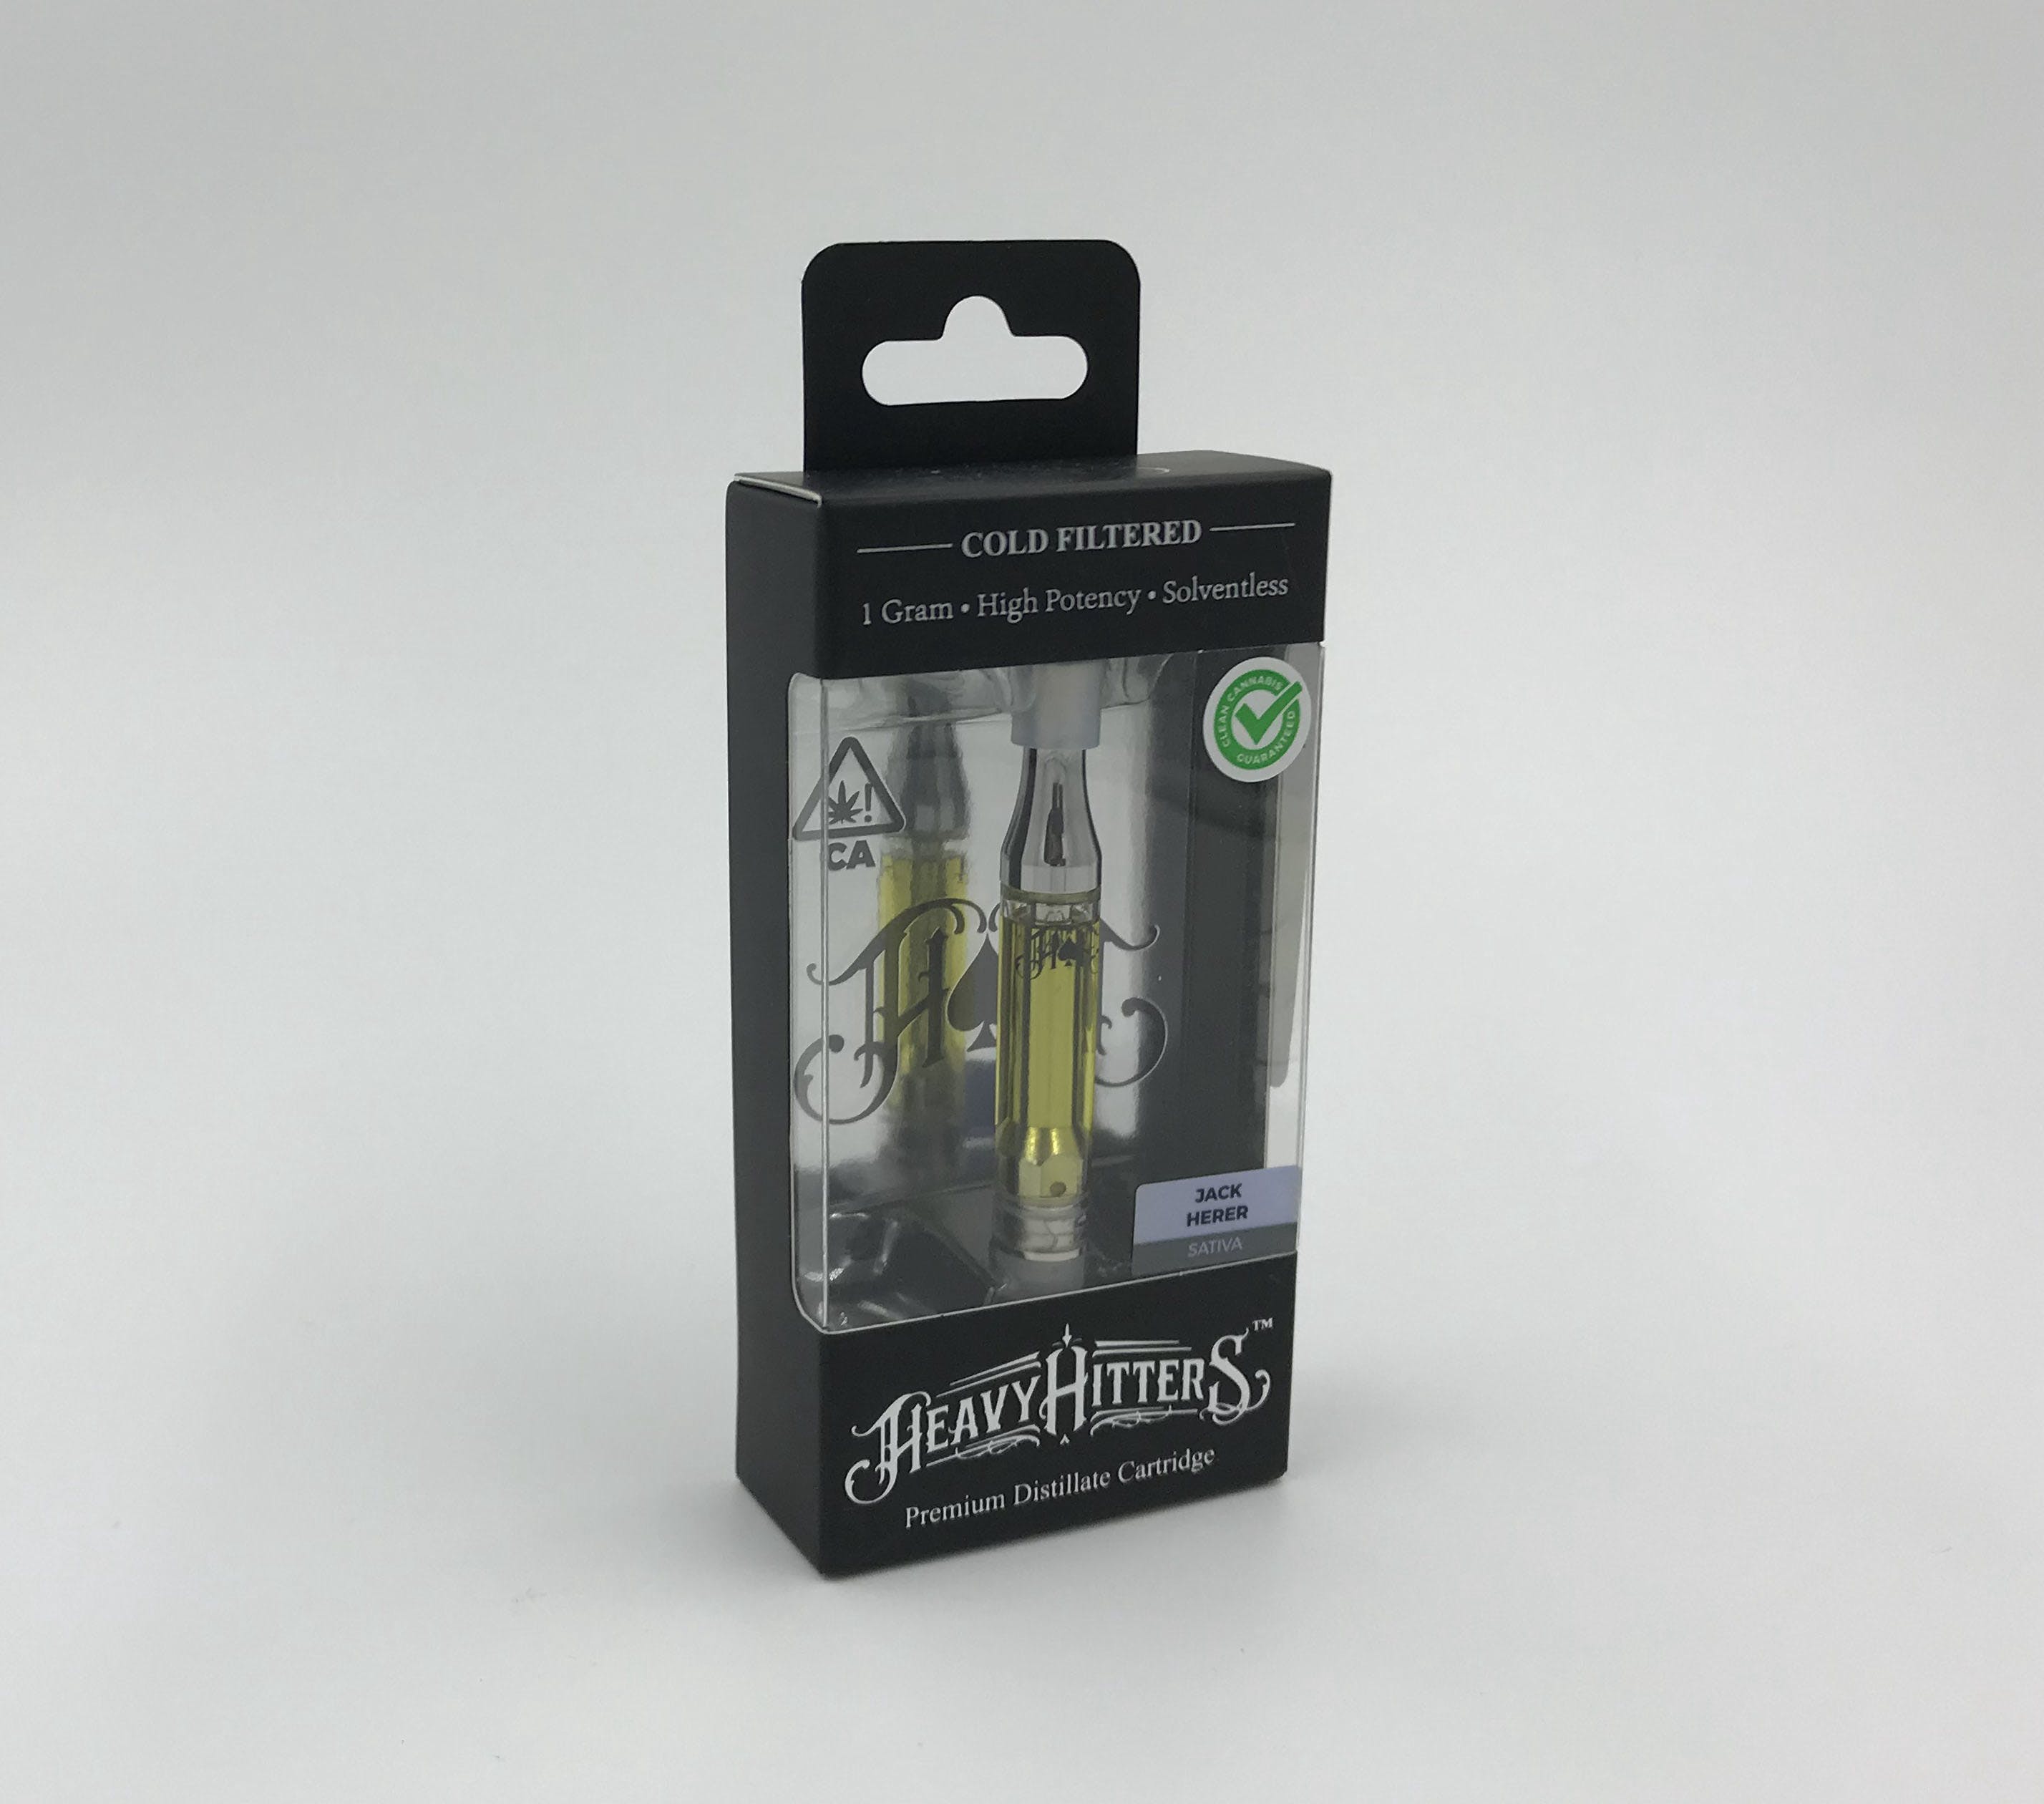 concentrate-heavy-hitters-jack-herer-cartridges-by-heavy-hitters